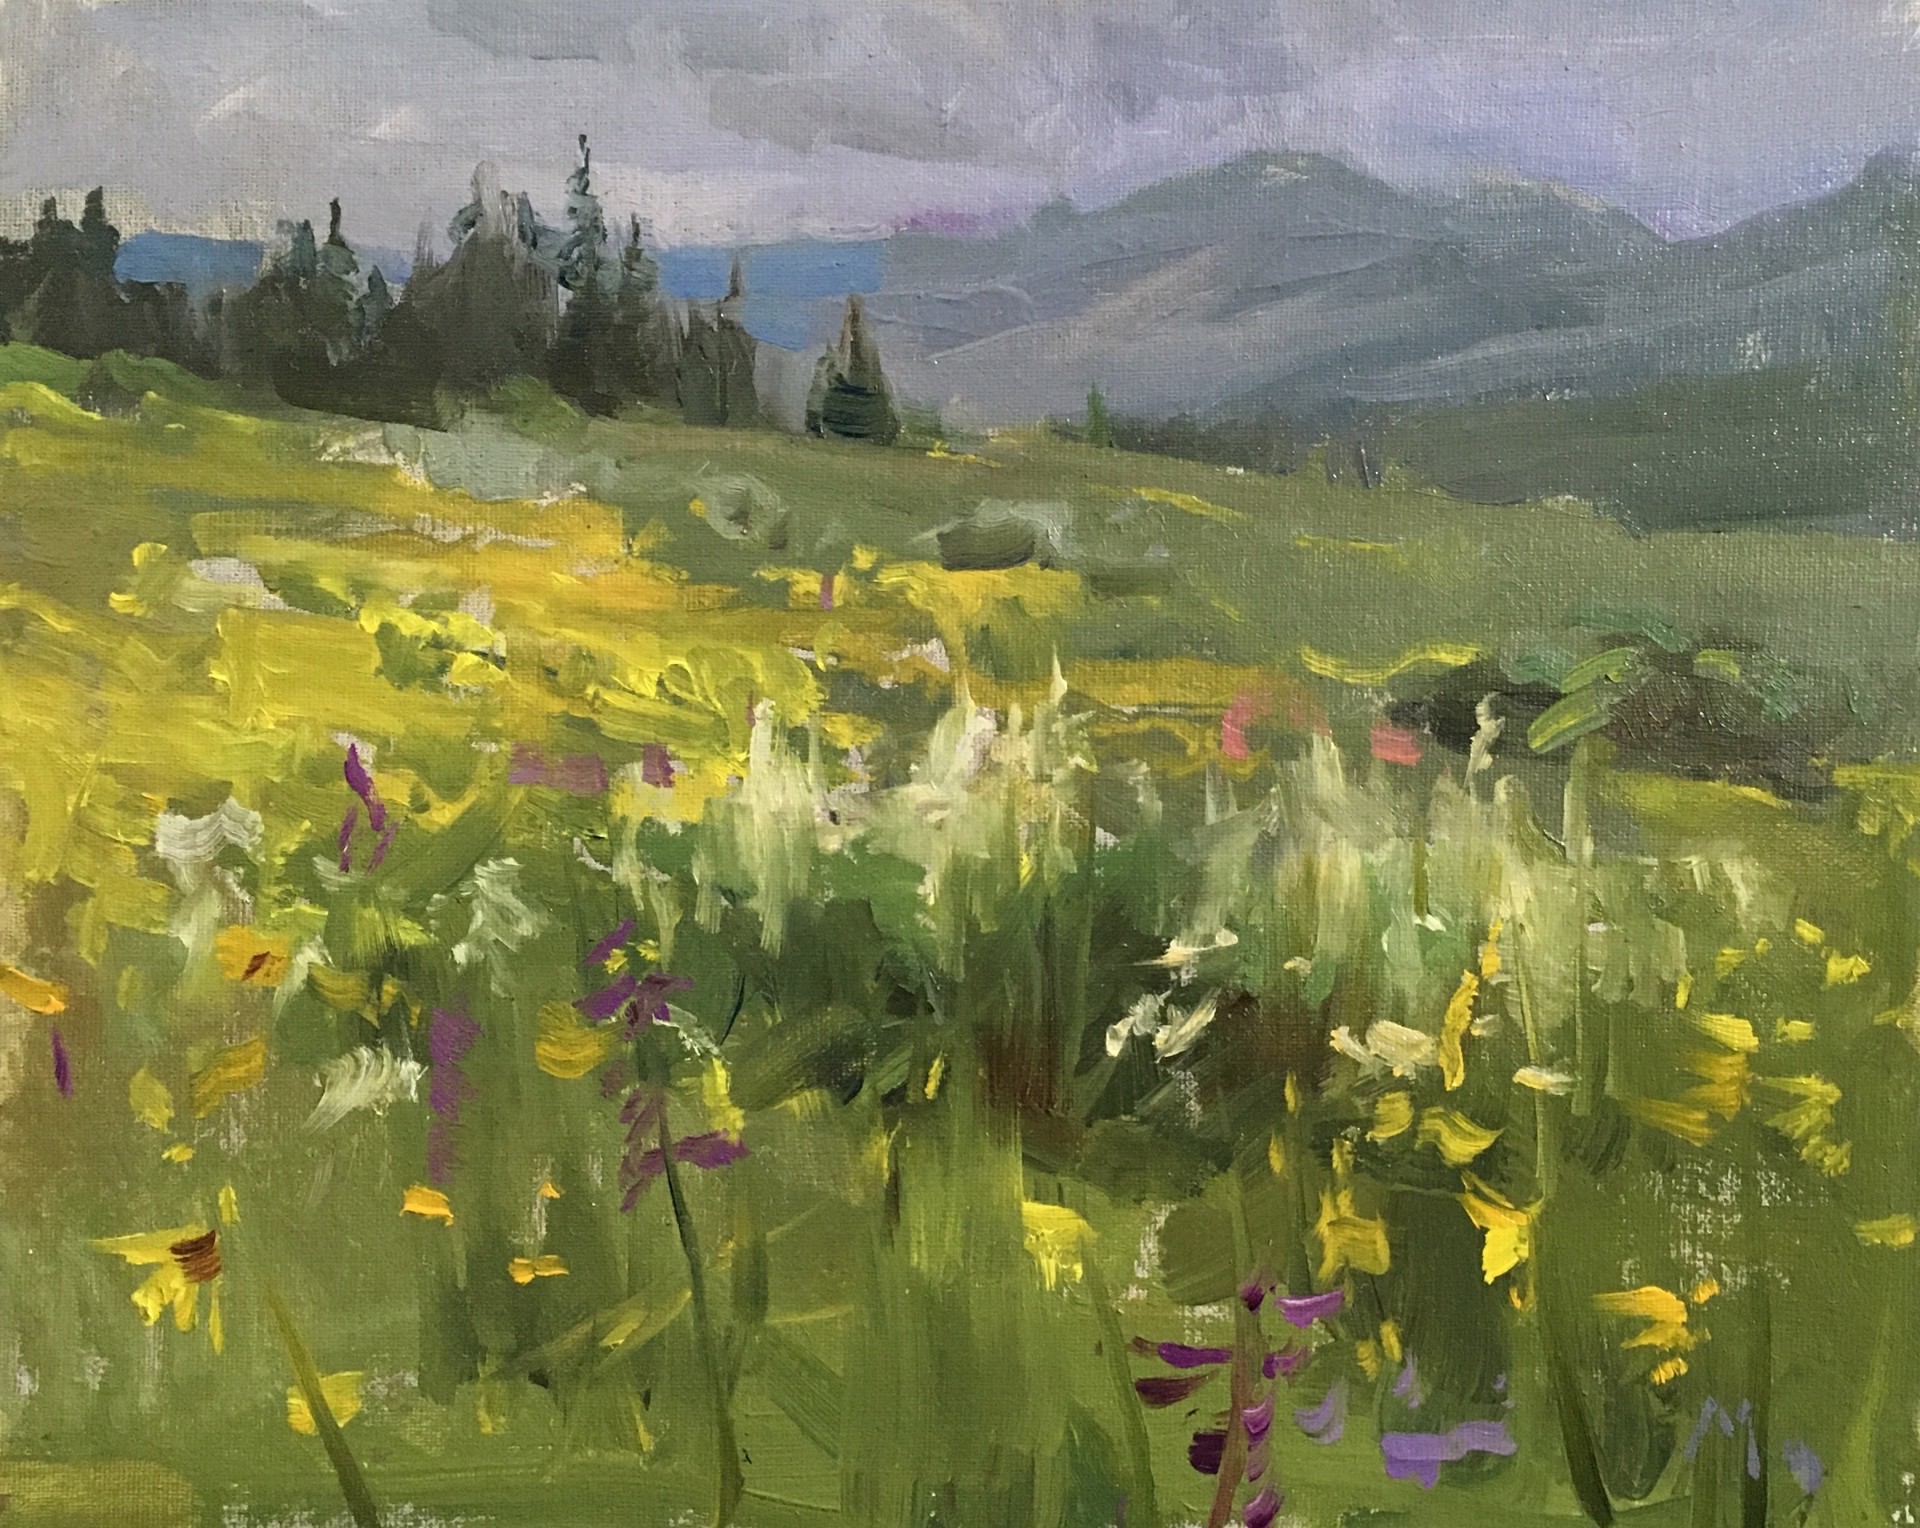 Crested Butte Wildflowers by Kyle Ma